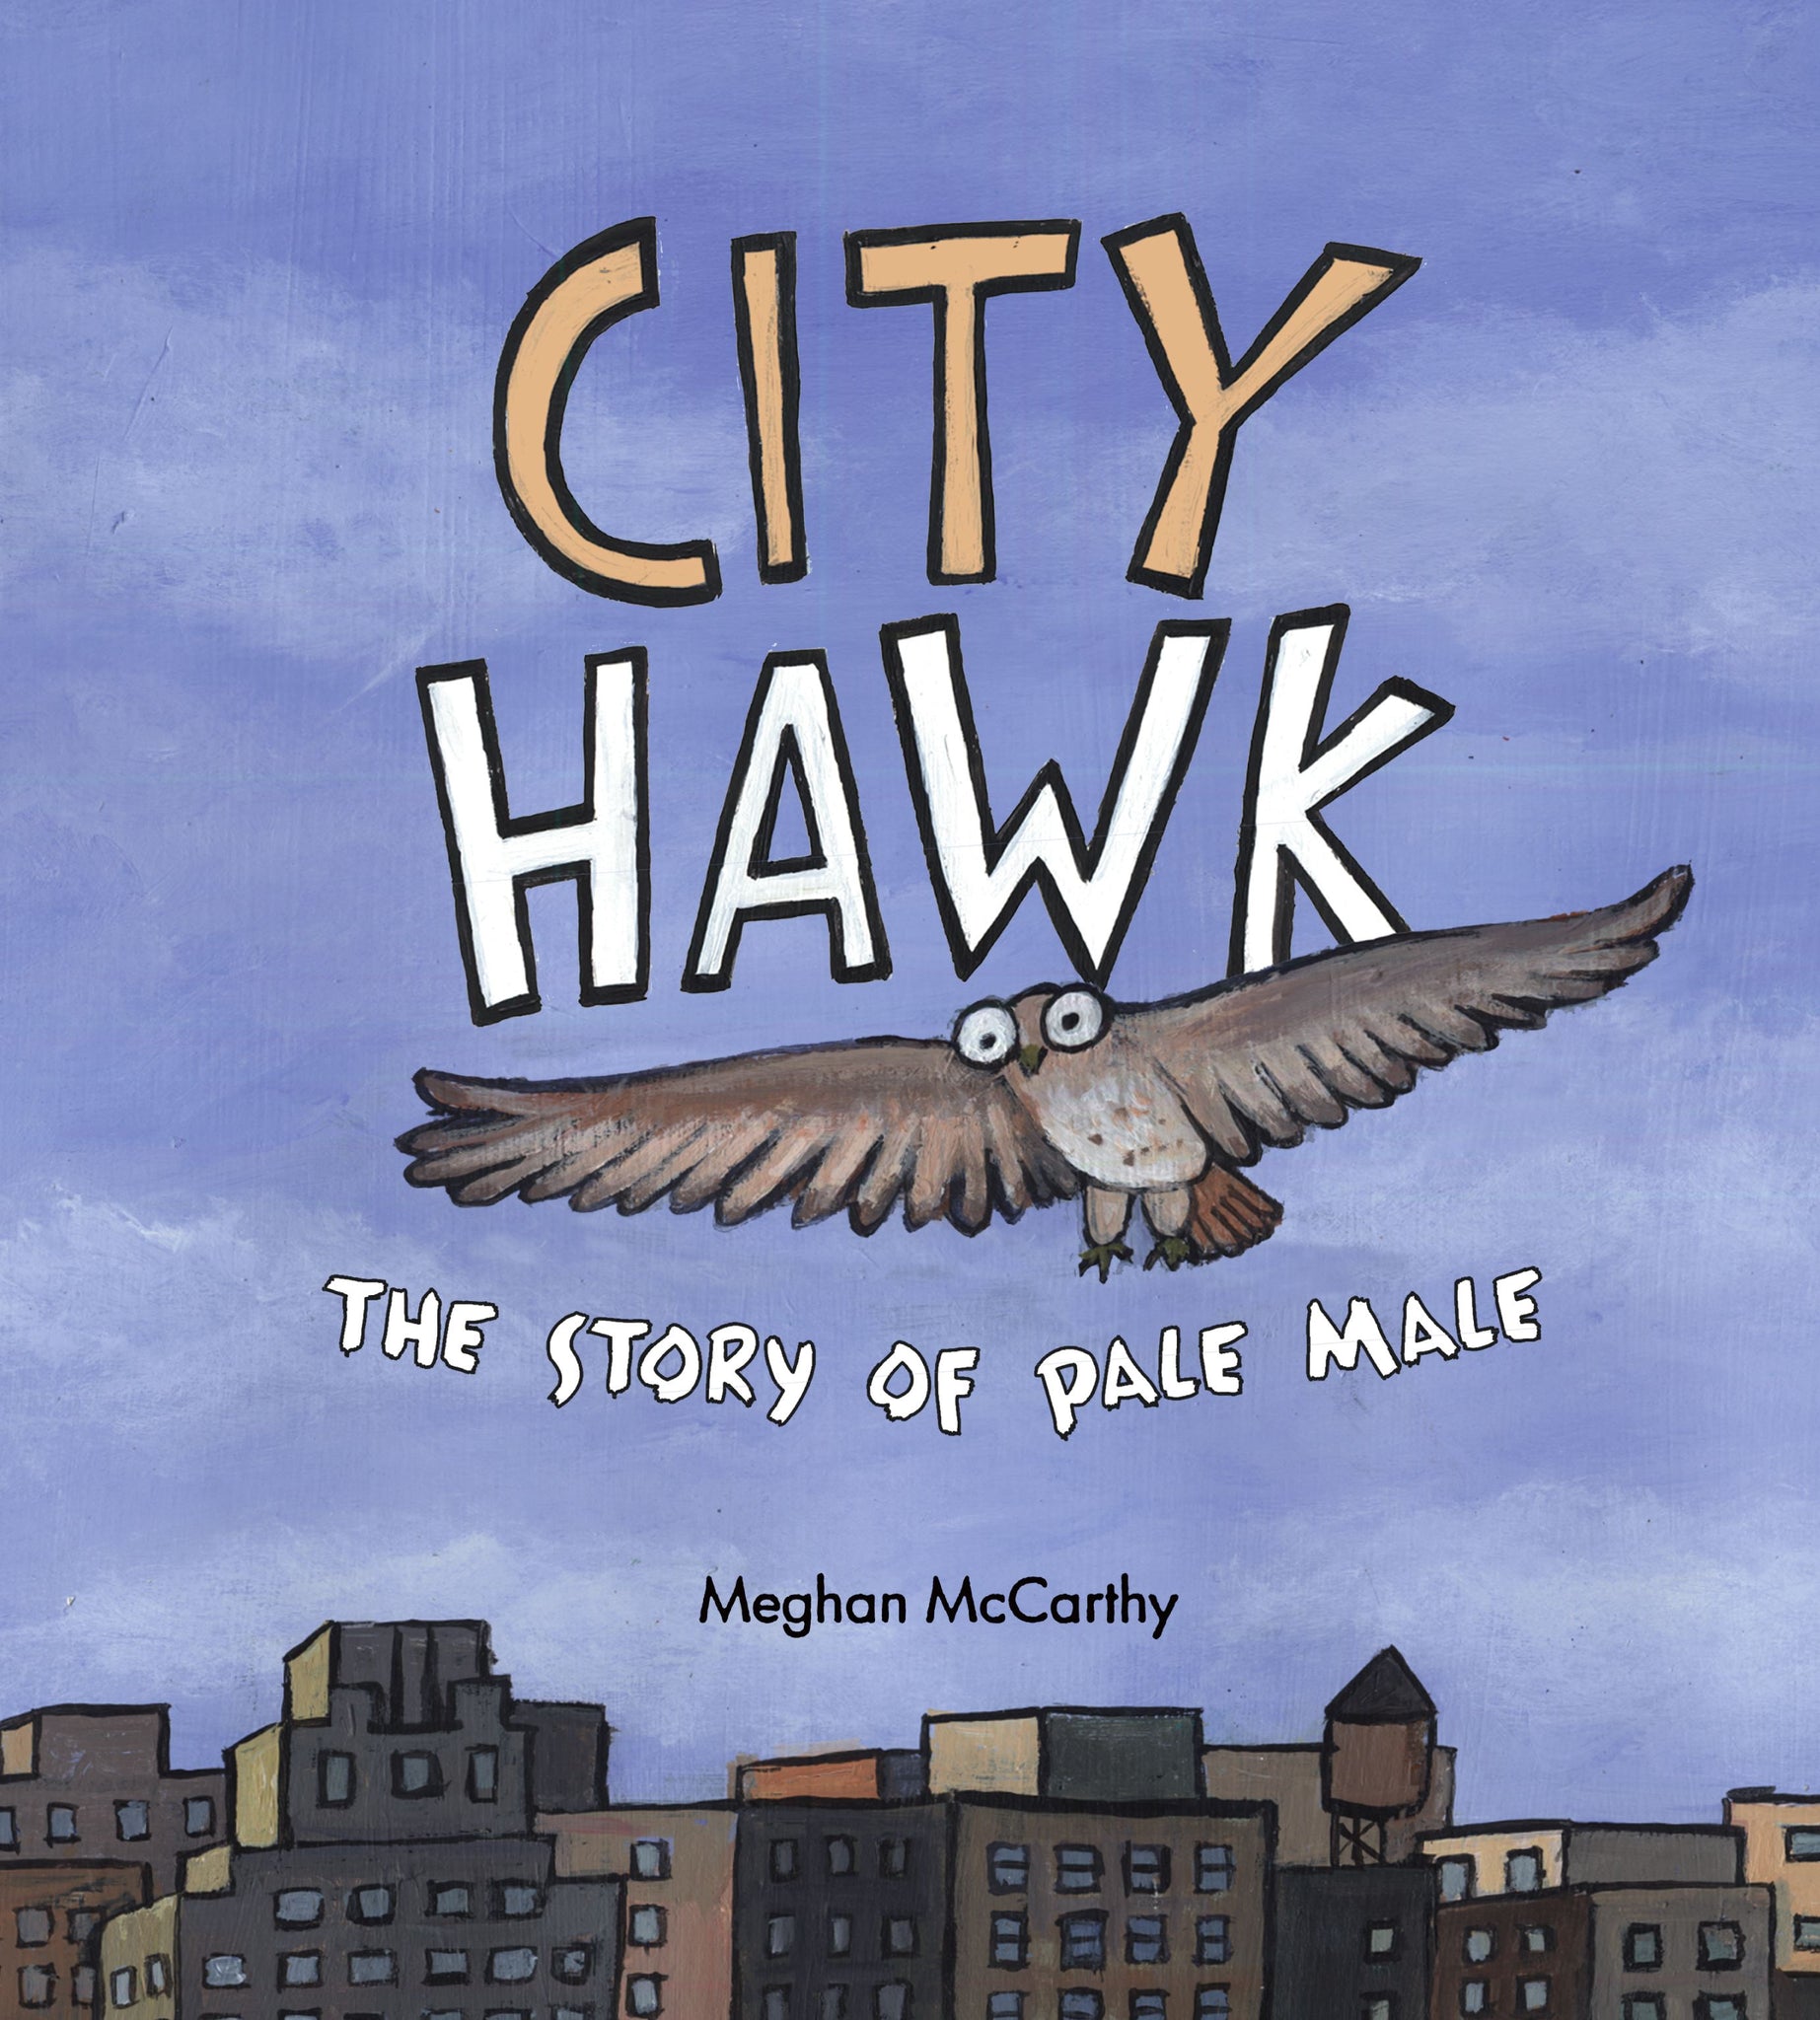 City Hawk : The Story of Pale Male